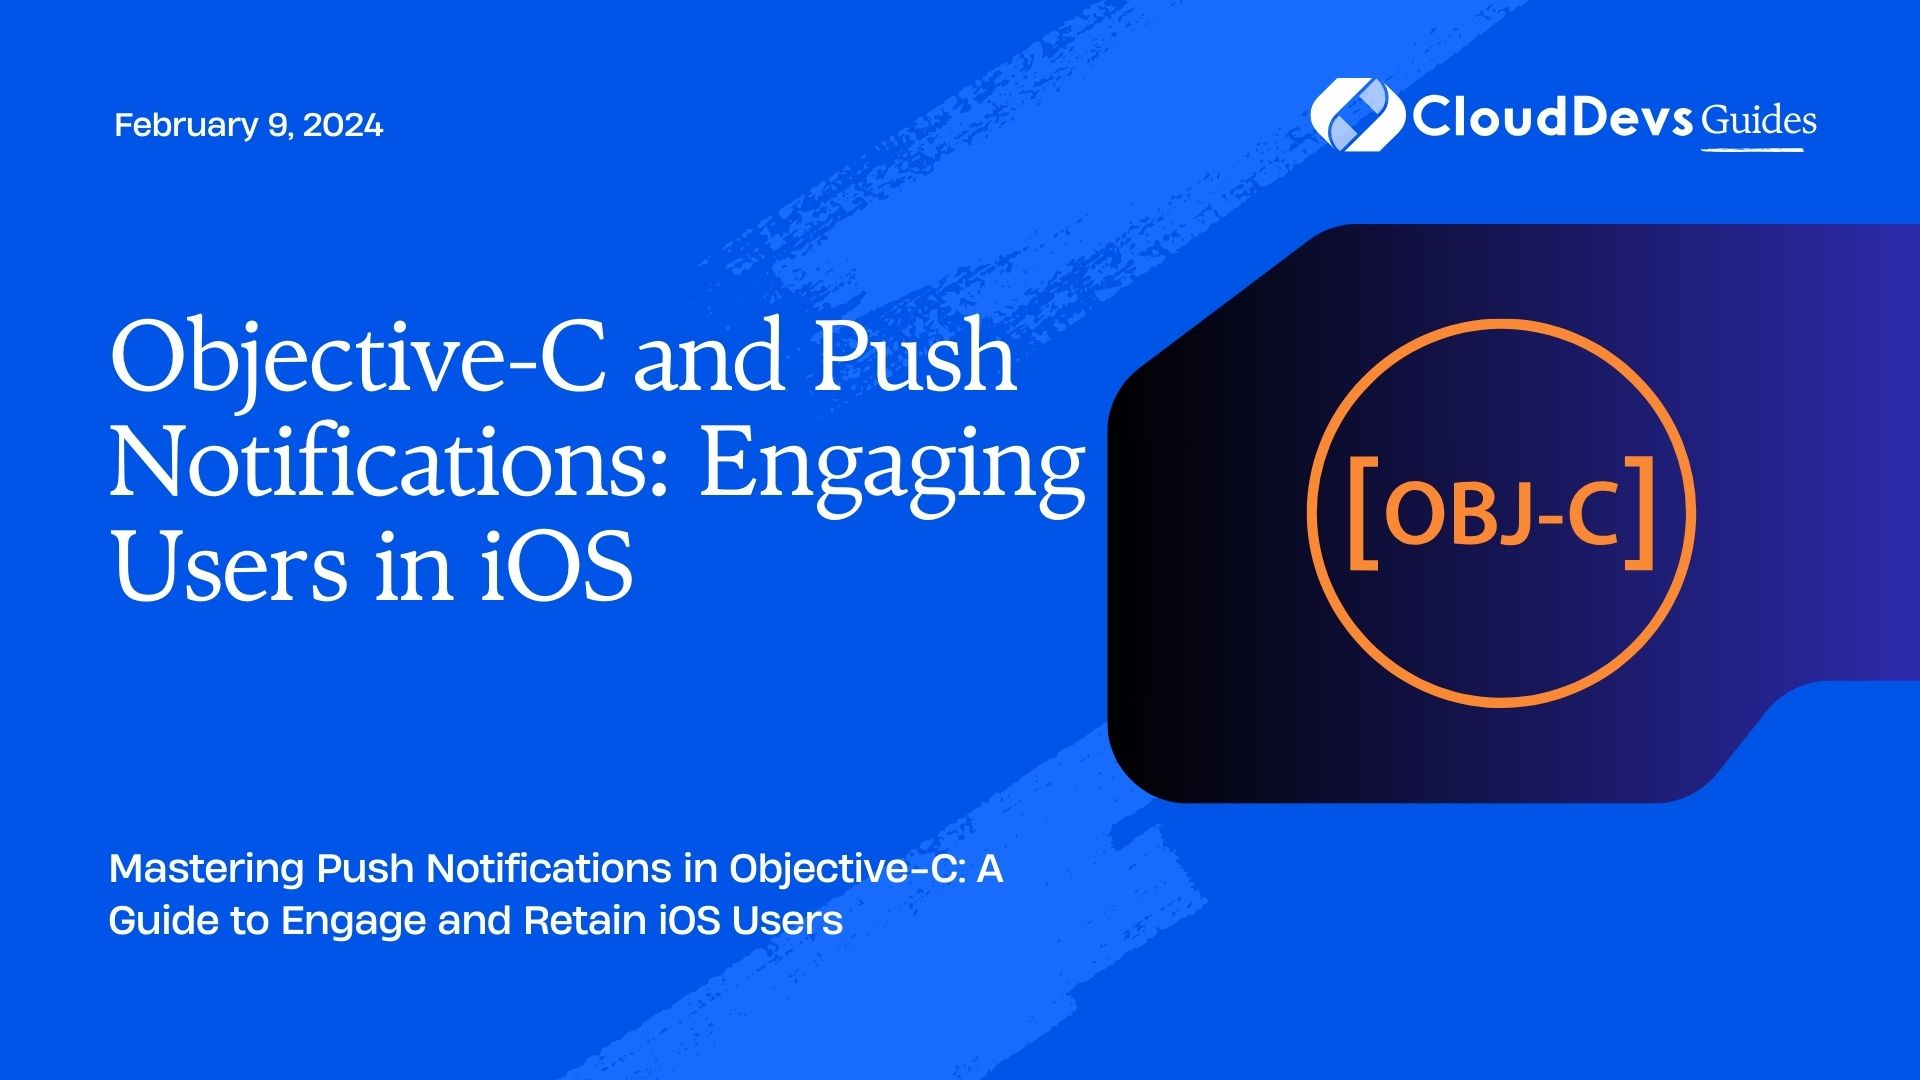 Objective-C and Push Notifications: Engaging Users in iOS